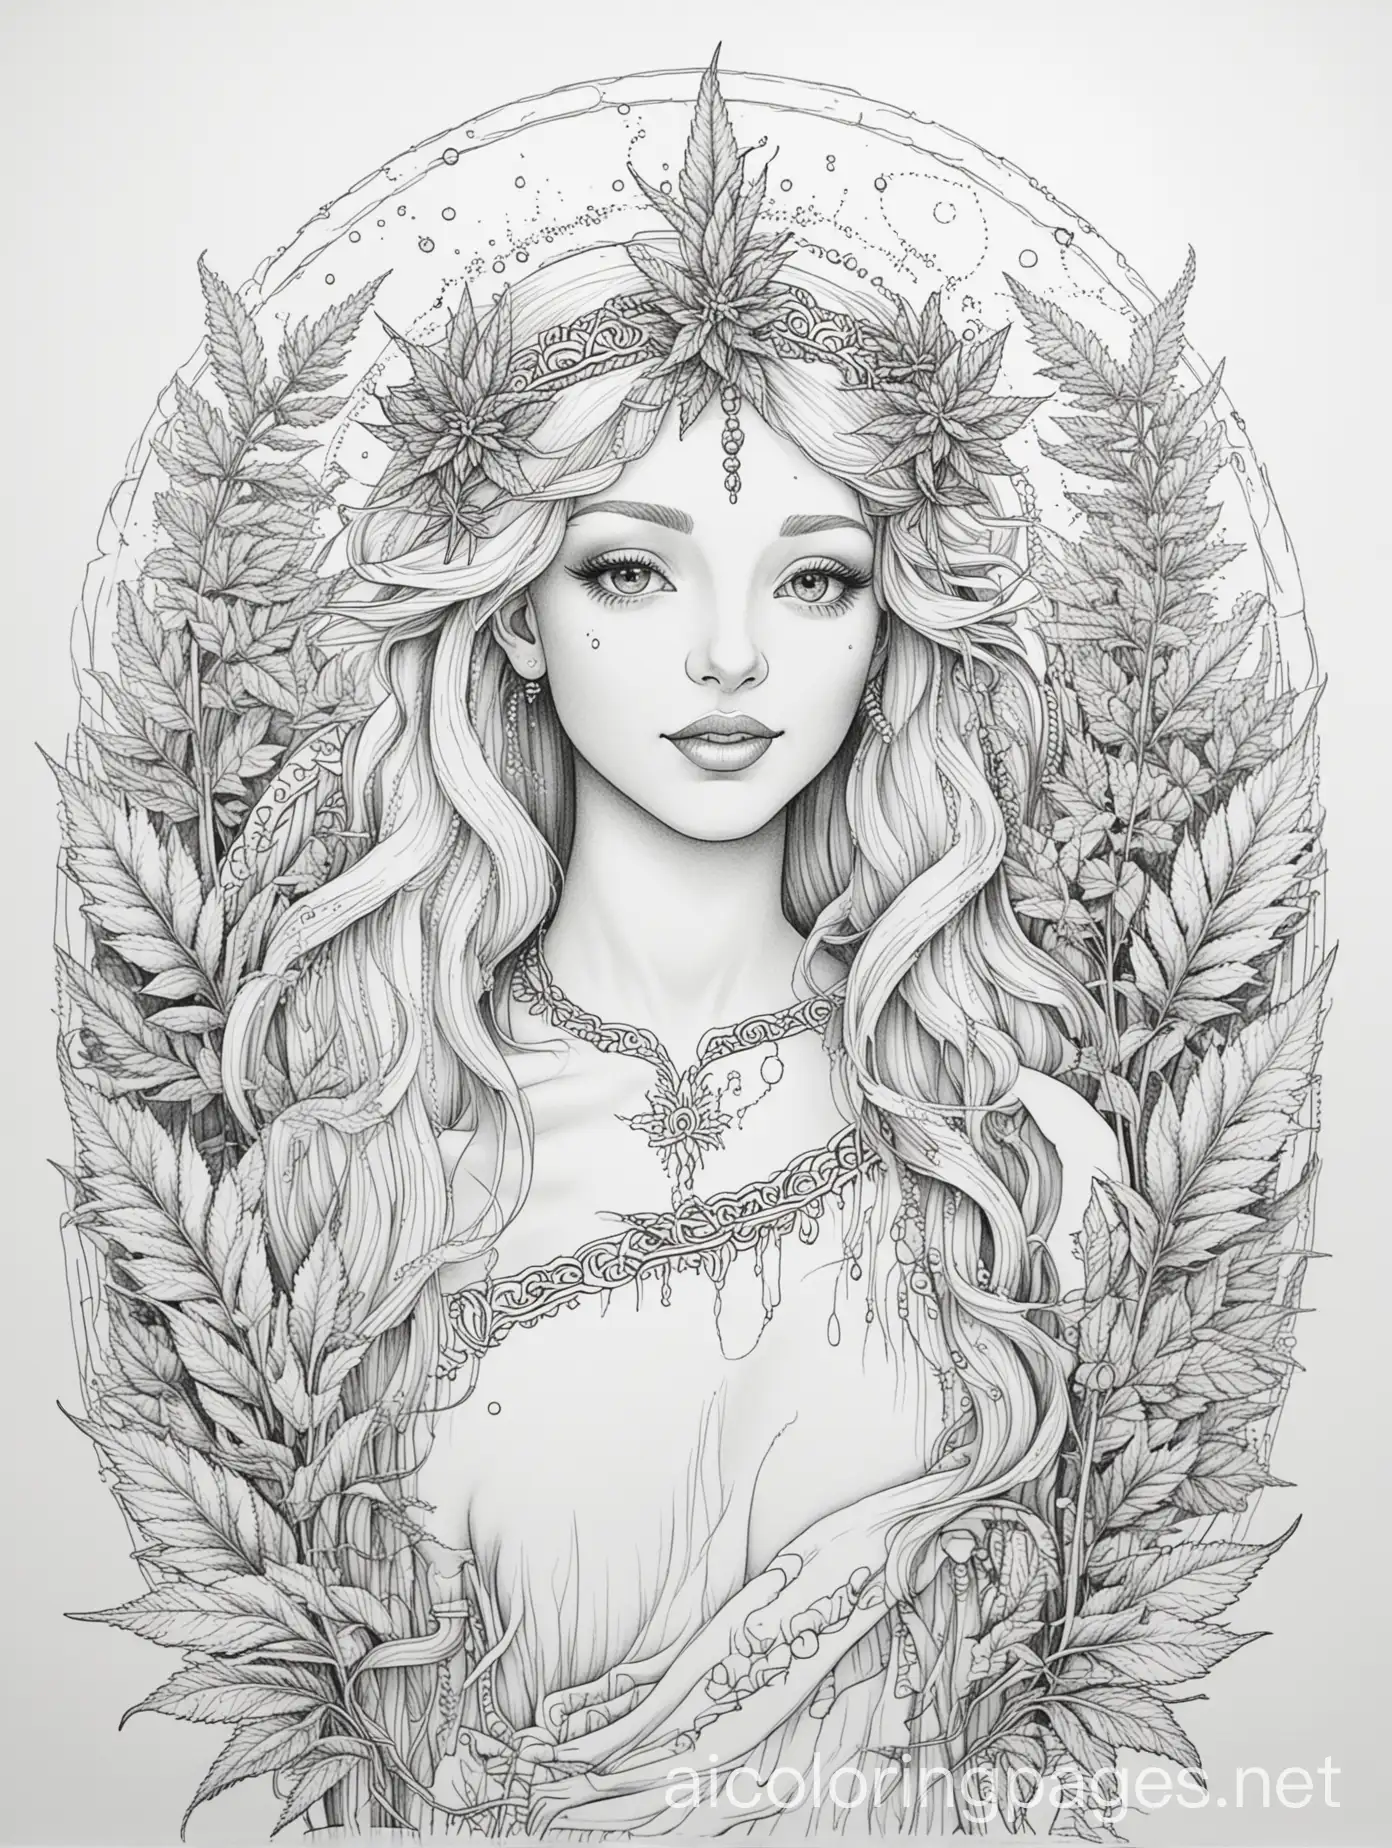 Virgo-Cannabis-Fantasy-Coloring-Page-Simple-Black-and-White-Line-Art-for-Easy-Coloring